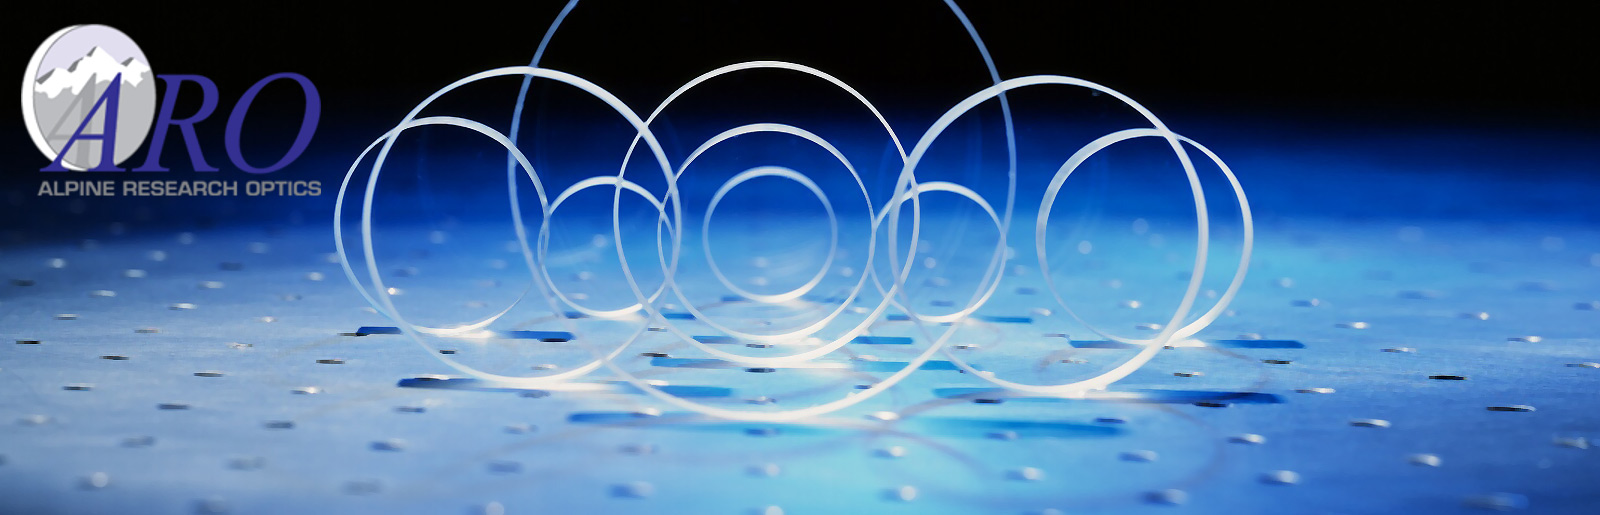 Transparent circular objects on a blue surface